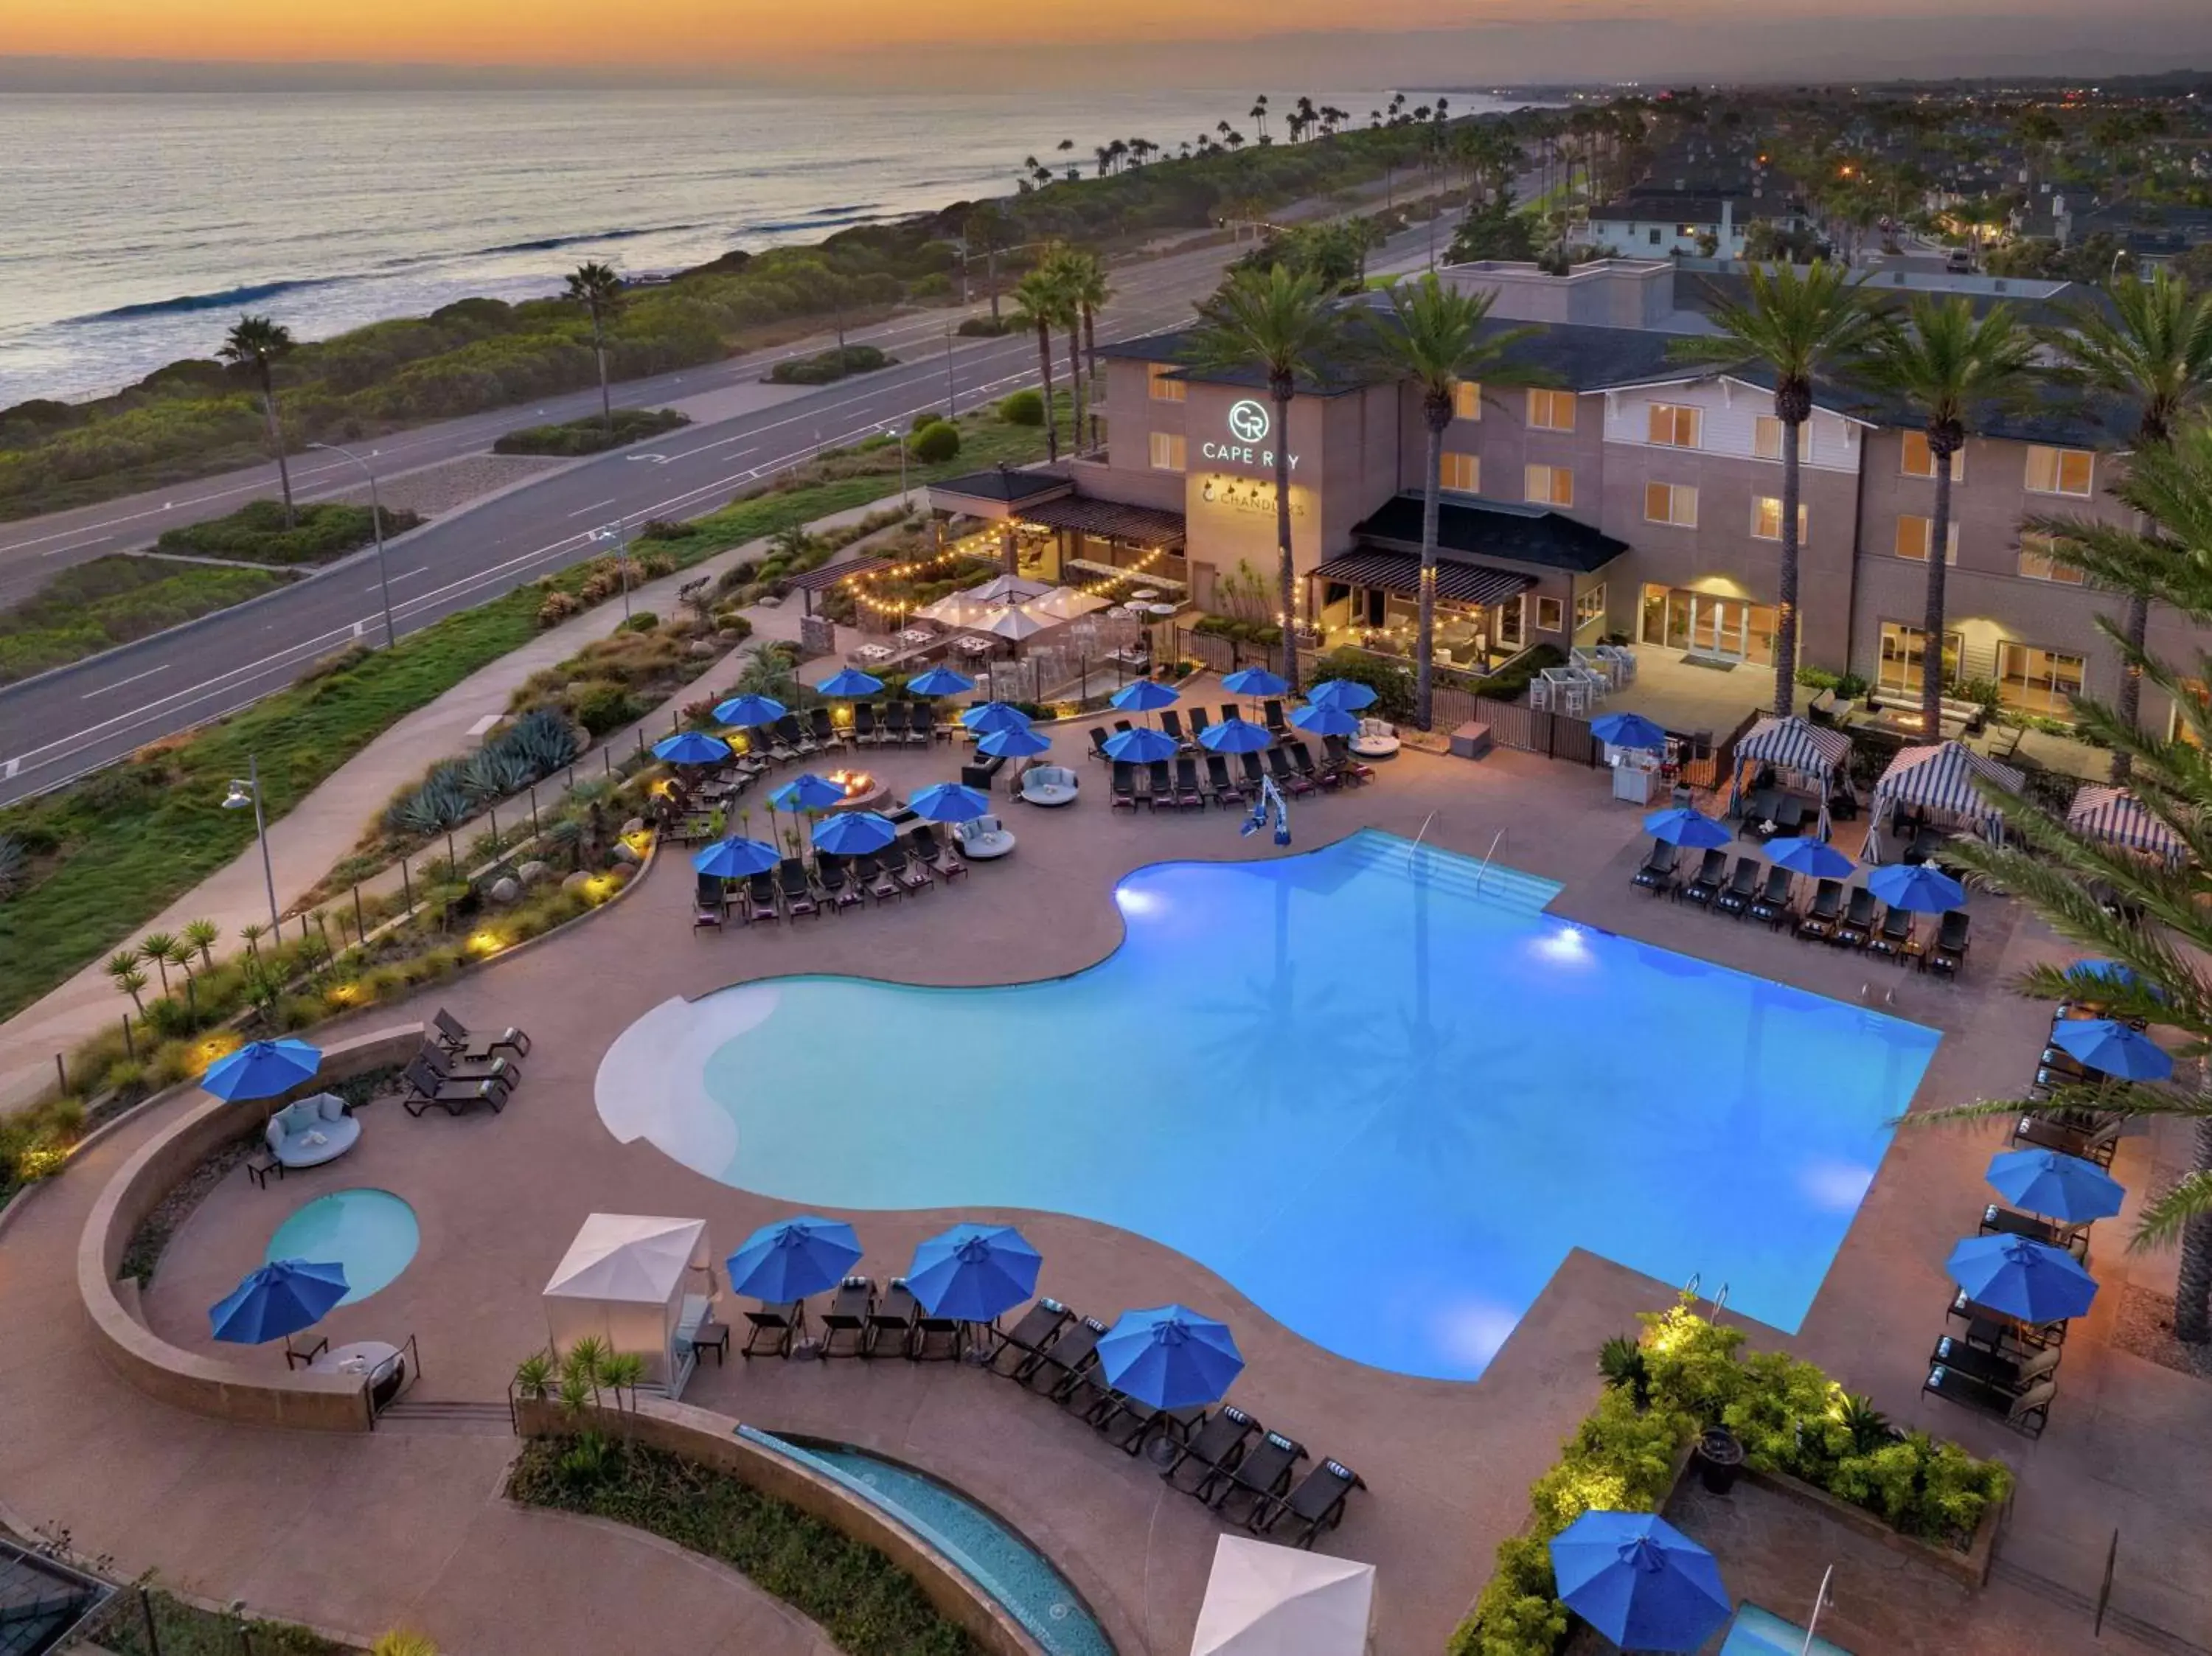 Property building, Pool View in Cape Rey Carlsbad Beach, A Hilton Resort & Spa